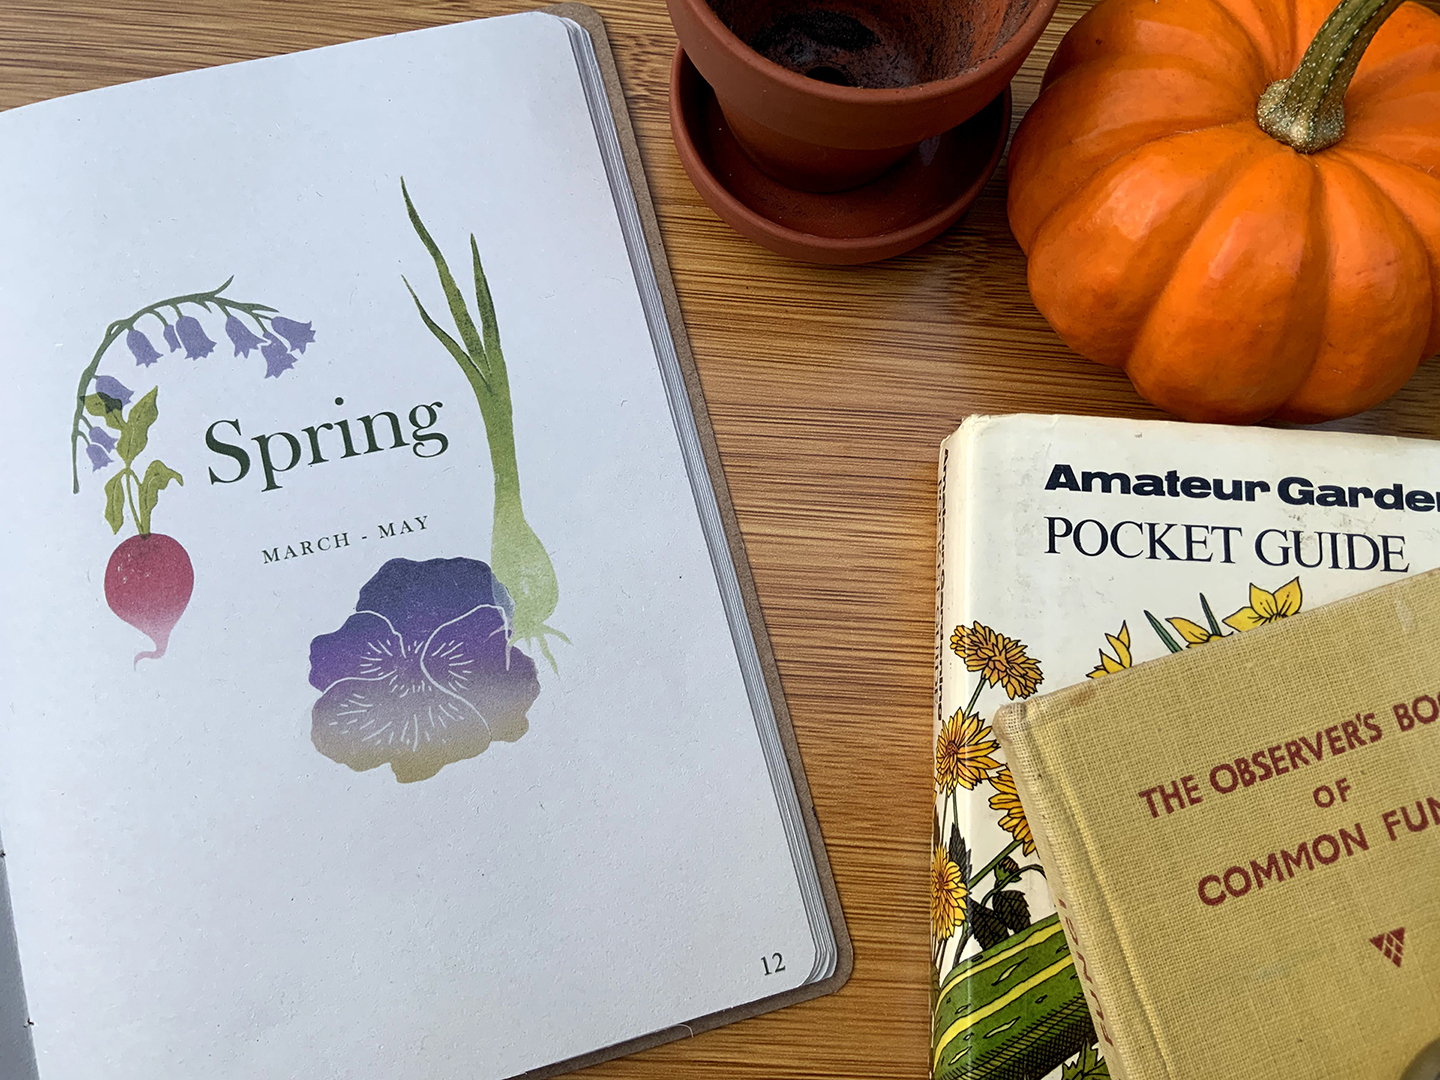 Designed, illustrated and hand-bound by myself. The Gardener’s Almanac serves as a convenient, pocket-sized tool, which can be referred to for general gardening guidance, as well as a journal for the user to write their own notes, lists, and plans.